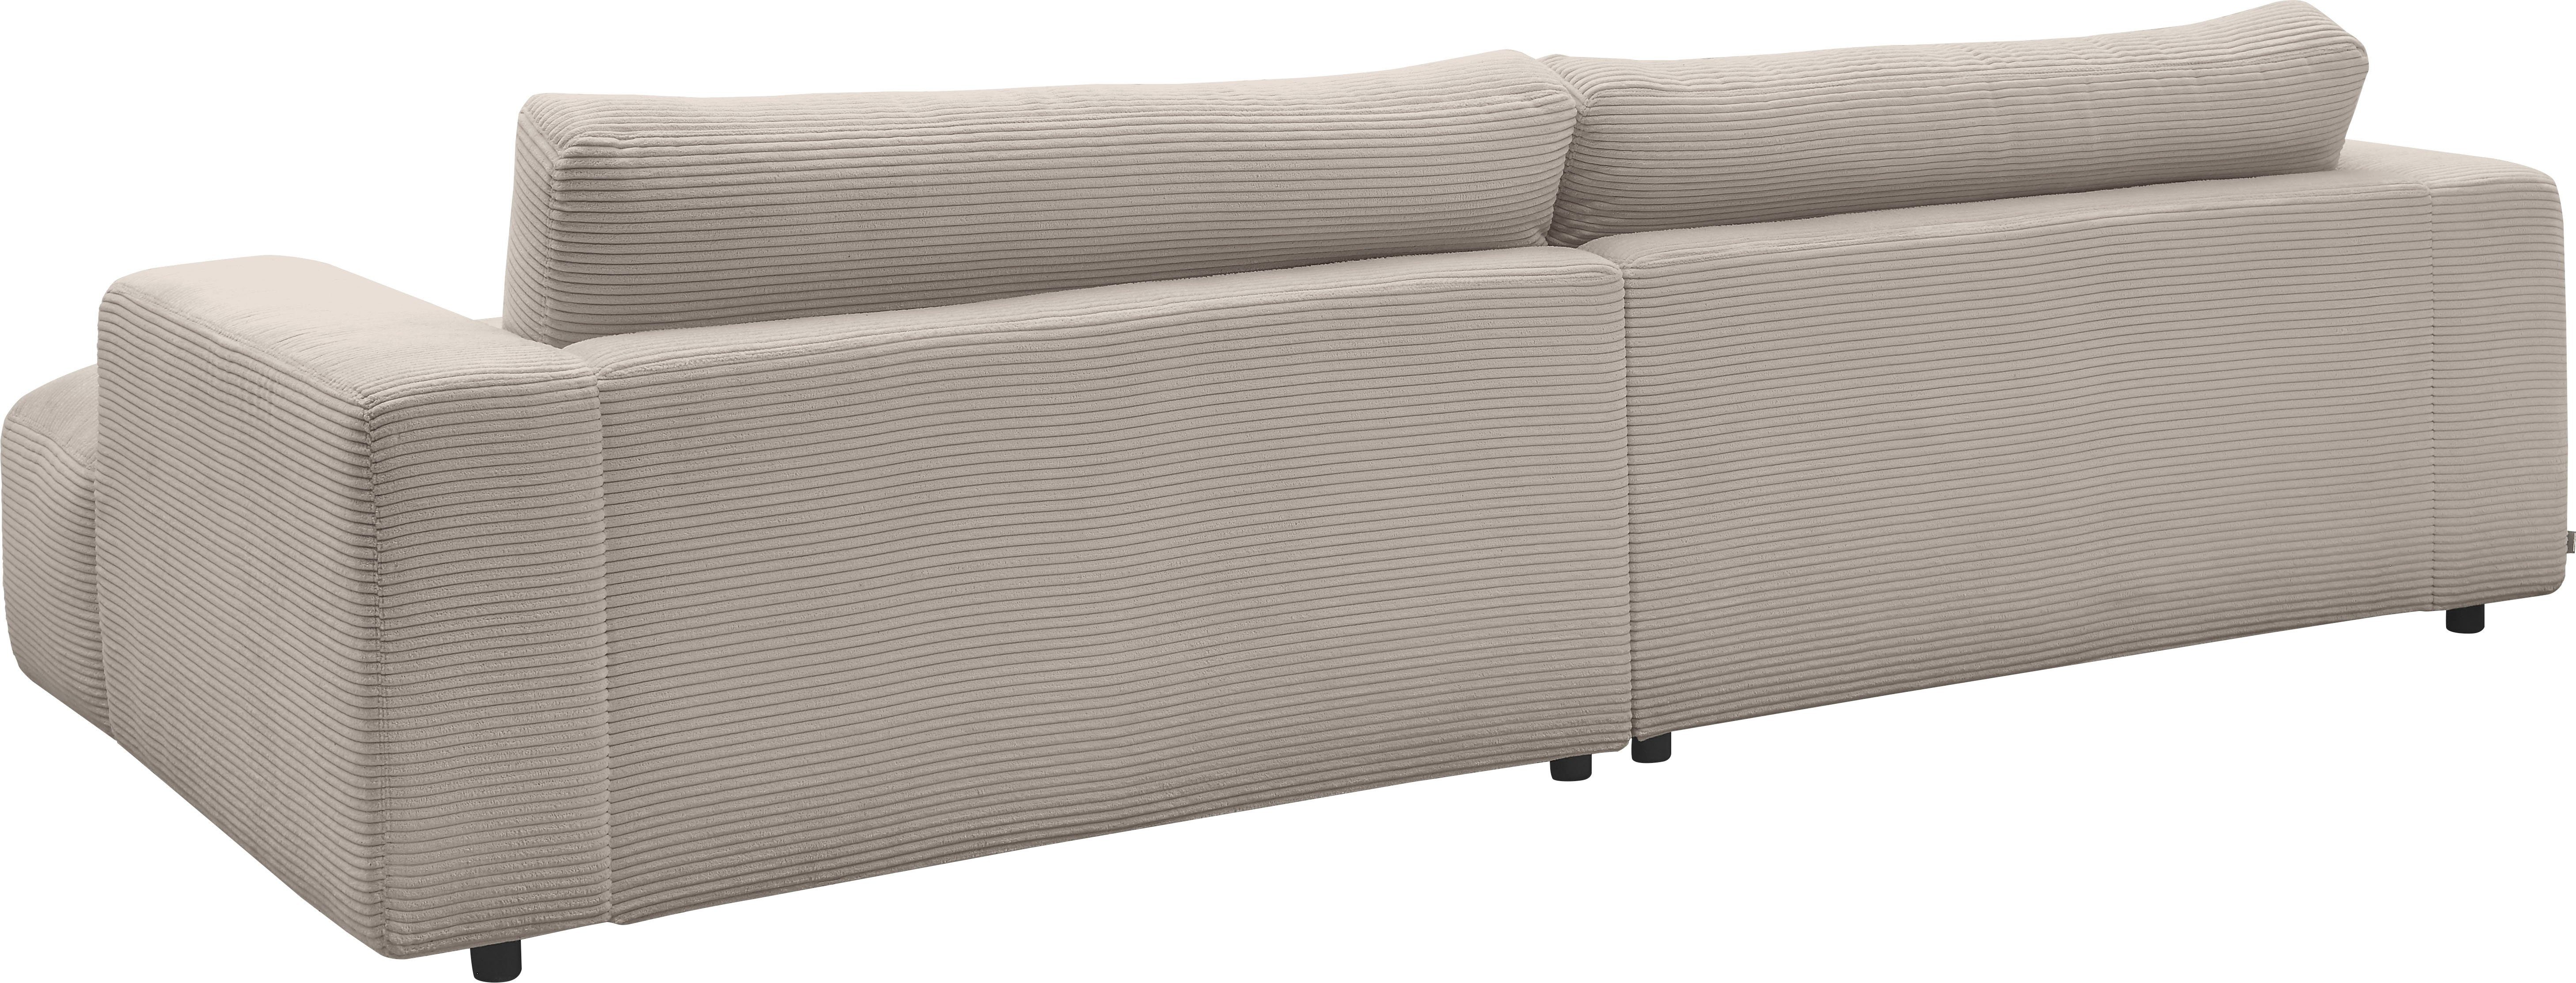 GALLERY M branded by cm Musterring 292 Cord-Bezug, light-grey Lucia, Loungesofa Breite